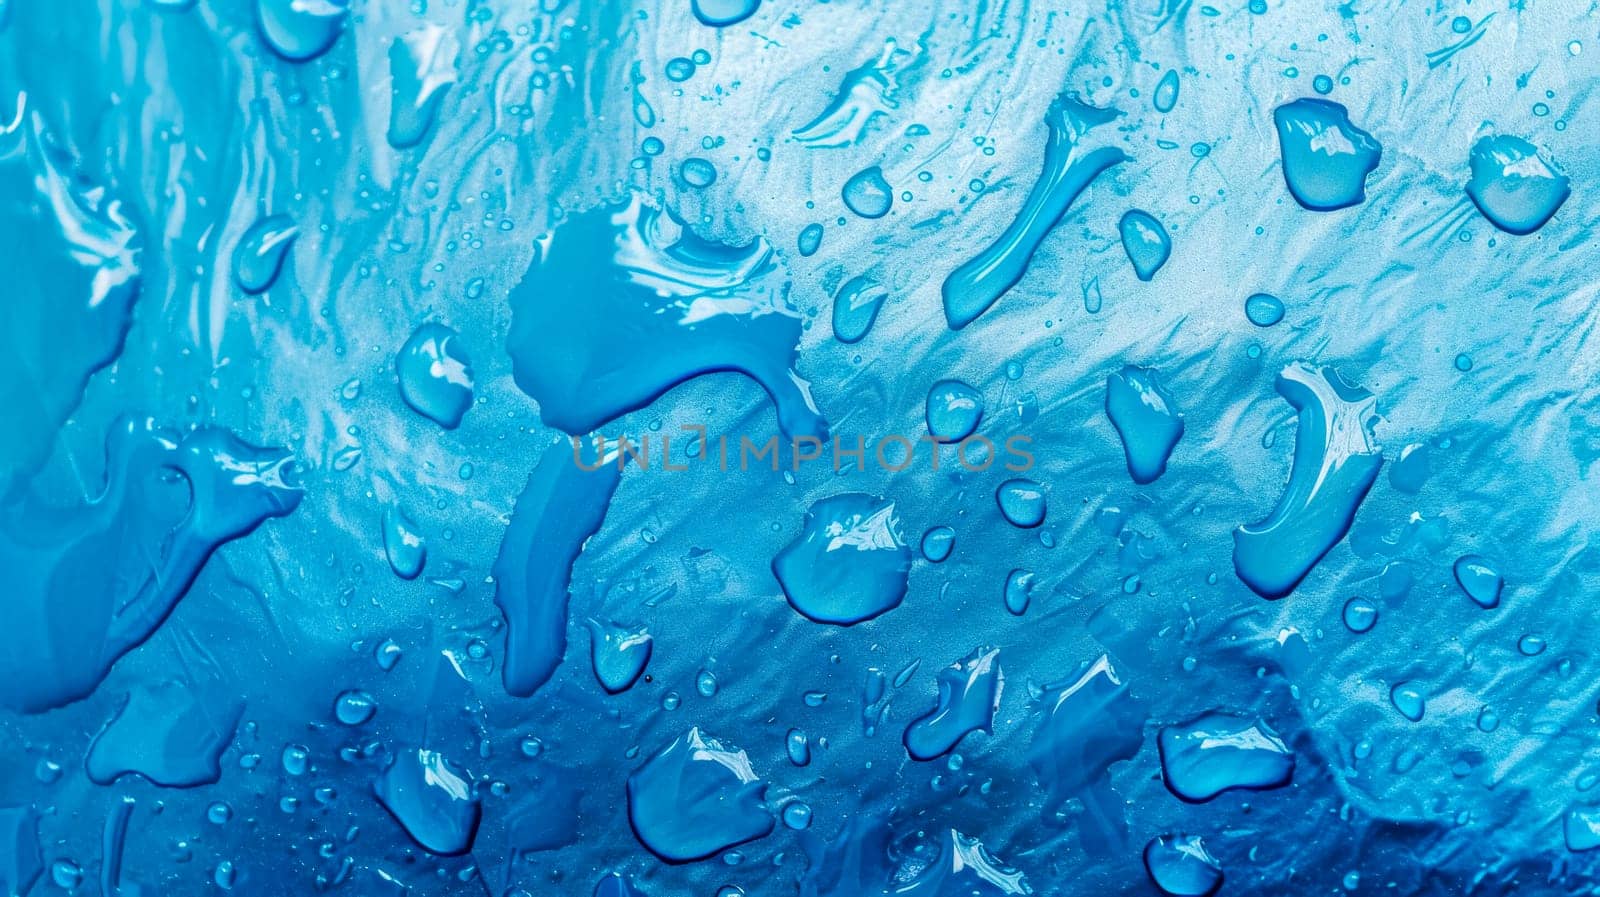 Close-up of refreshing water droplets on a vibrant blue textured background